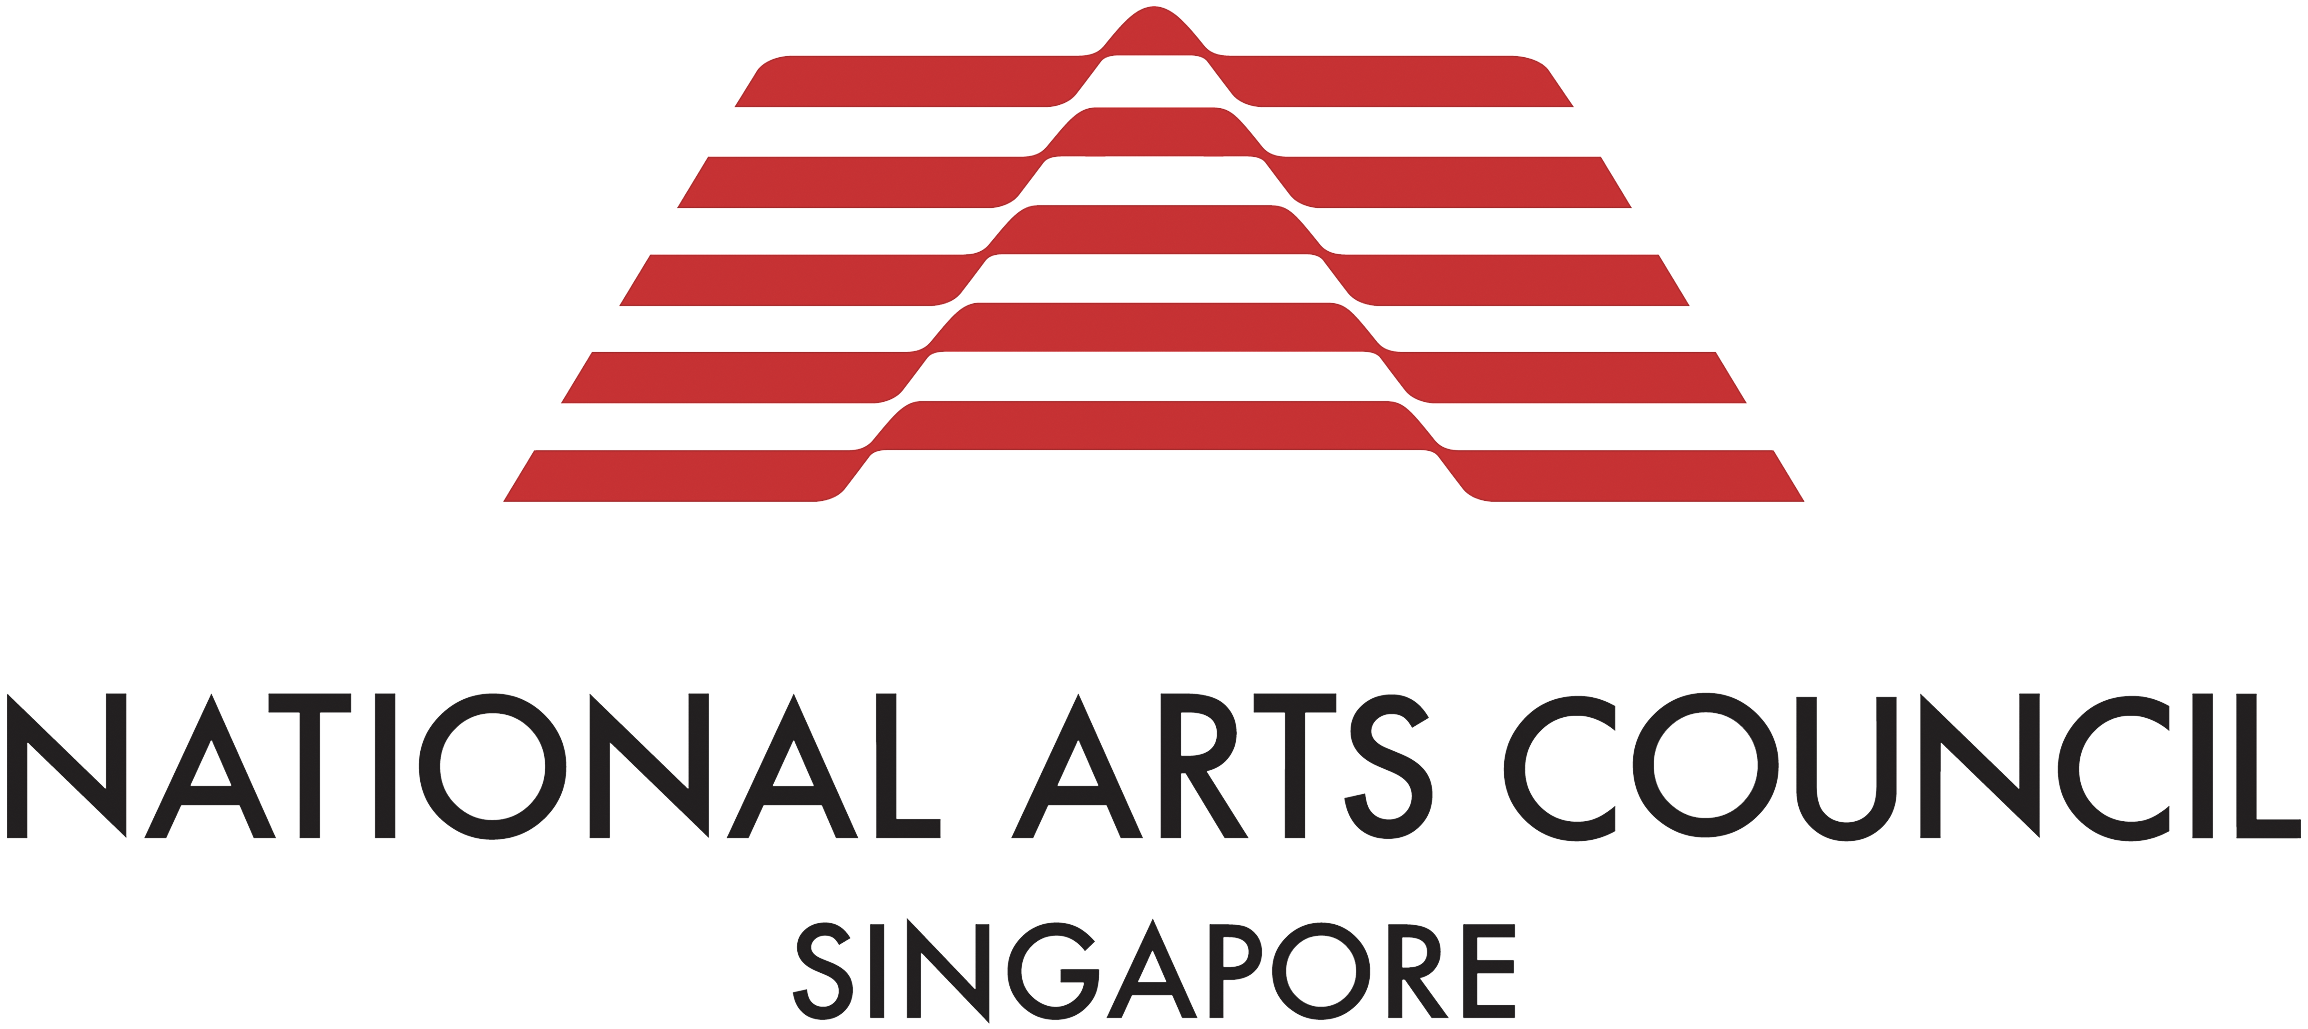 This logo of NAC features an arrow pointing upwards with alternating bands of red and white. Below this are the words ‘NATIONAL ARTS COUNCIL SINGAPORE’ in black sans-serif typeface.